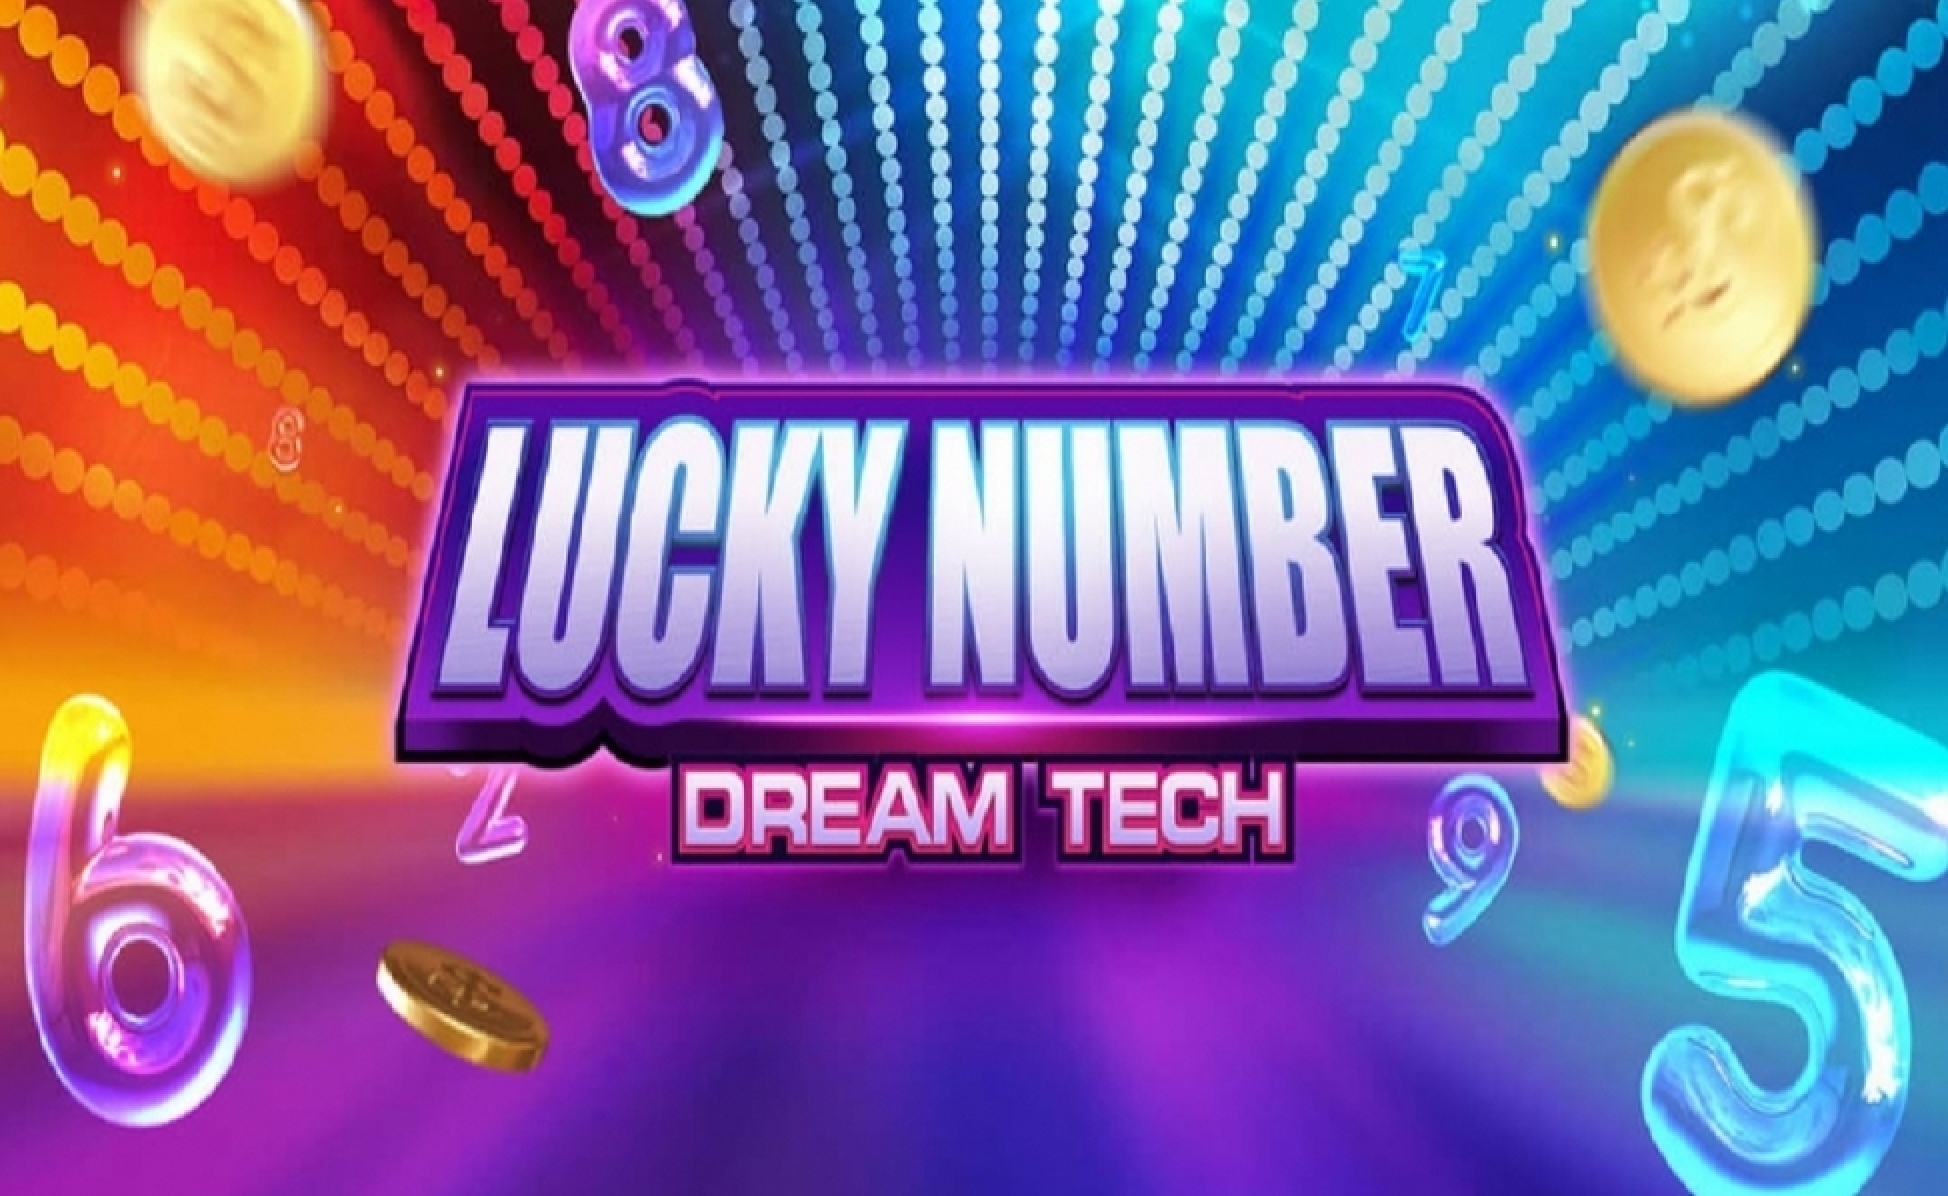 The Lucky Number Online Slot Demo Game by Dreamtech Gaming